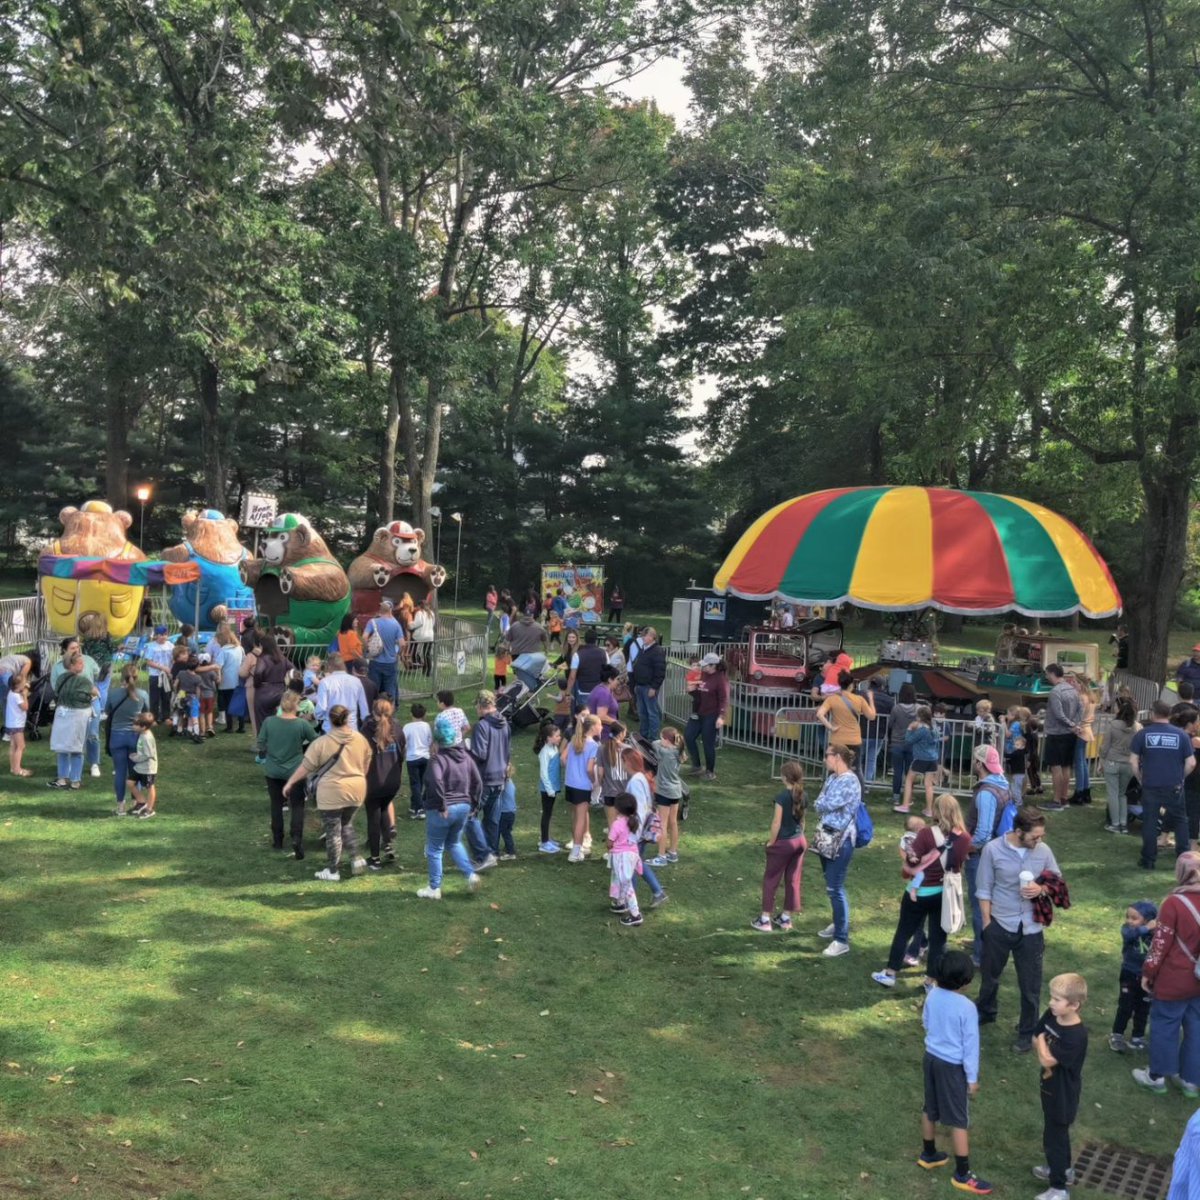 Great Fall Festival today! I hope everyone who came out, had a great time! Thank you to the staff at Town Hall, the sponsors and all of the volunteers for putting on a successful event! #MansfieldMA #Fall